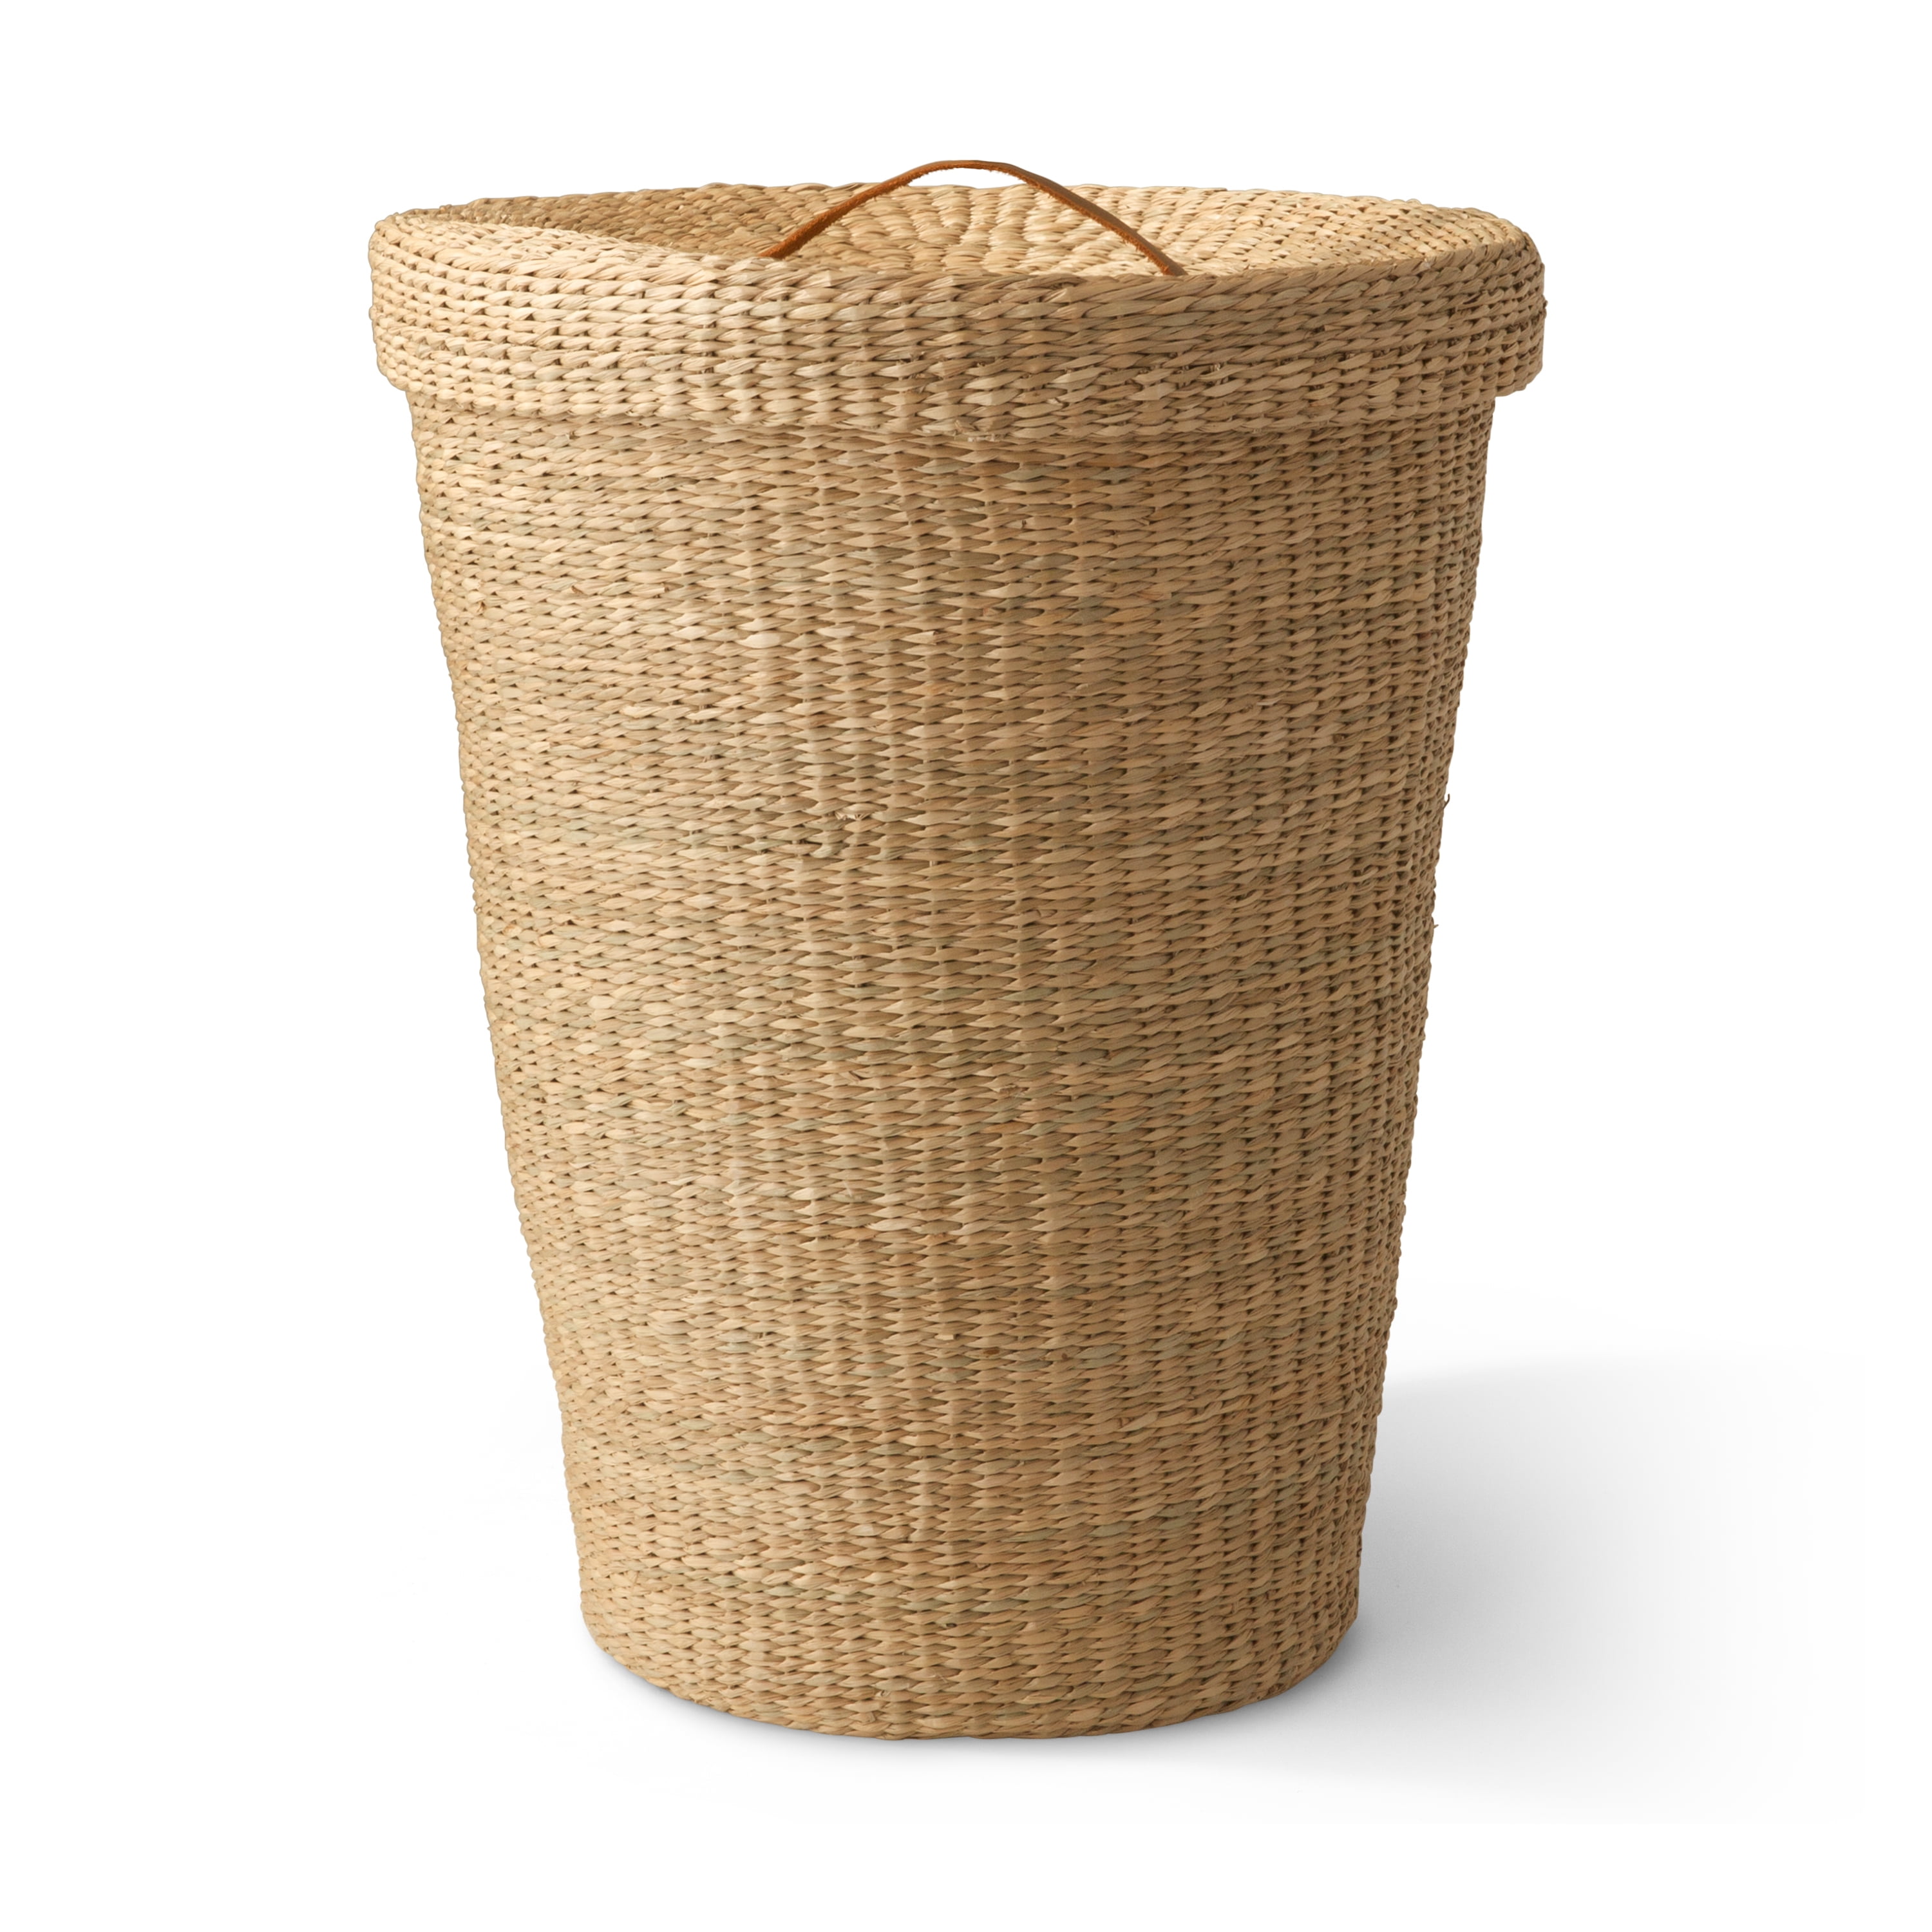 MoDRN Naturals Floppy Seagrass Laundry Basket with Lid with Leather ...